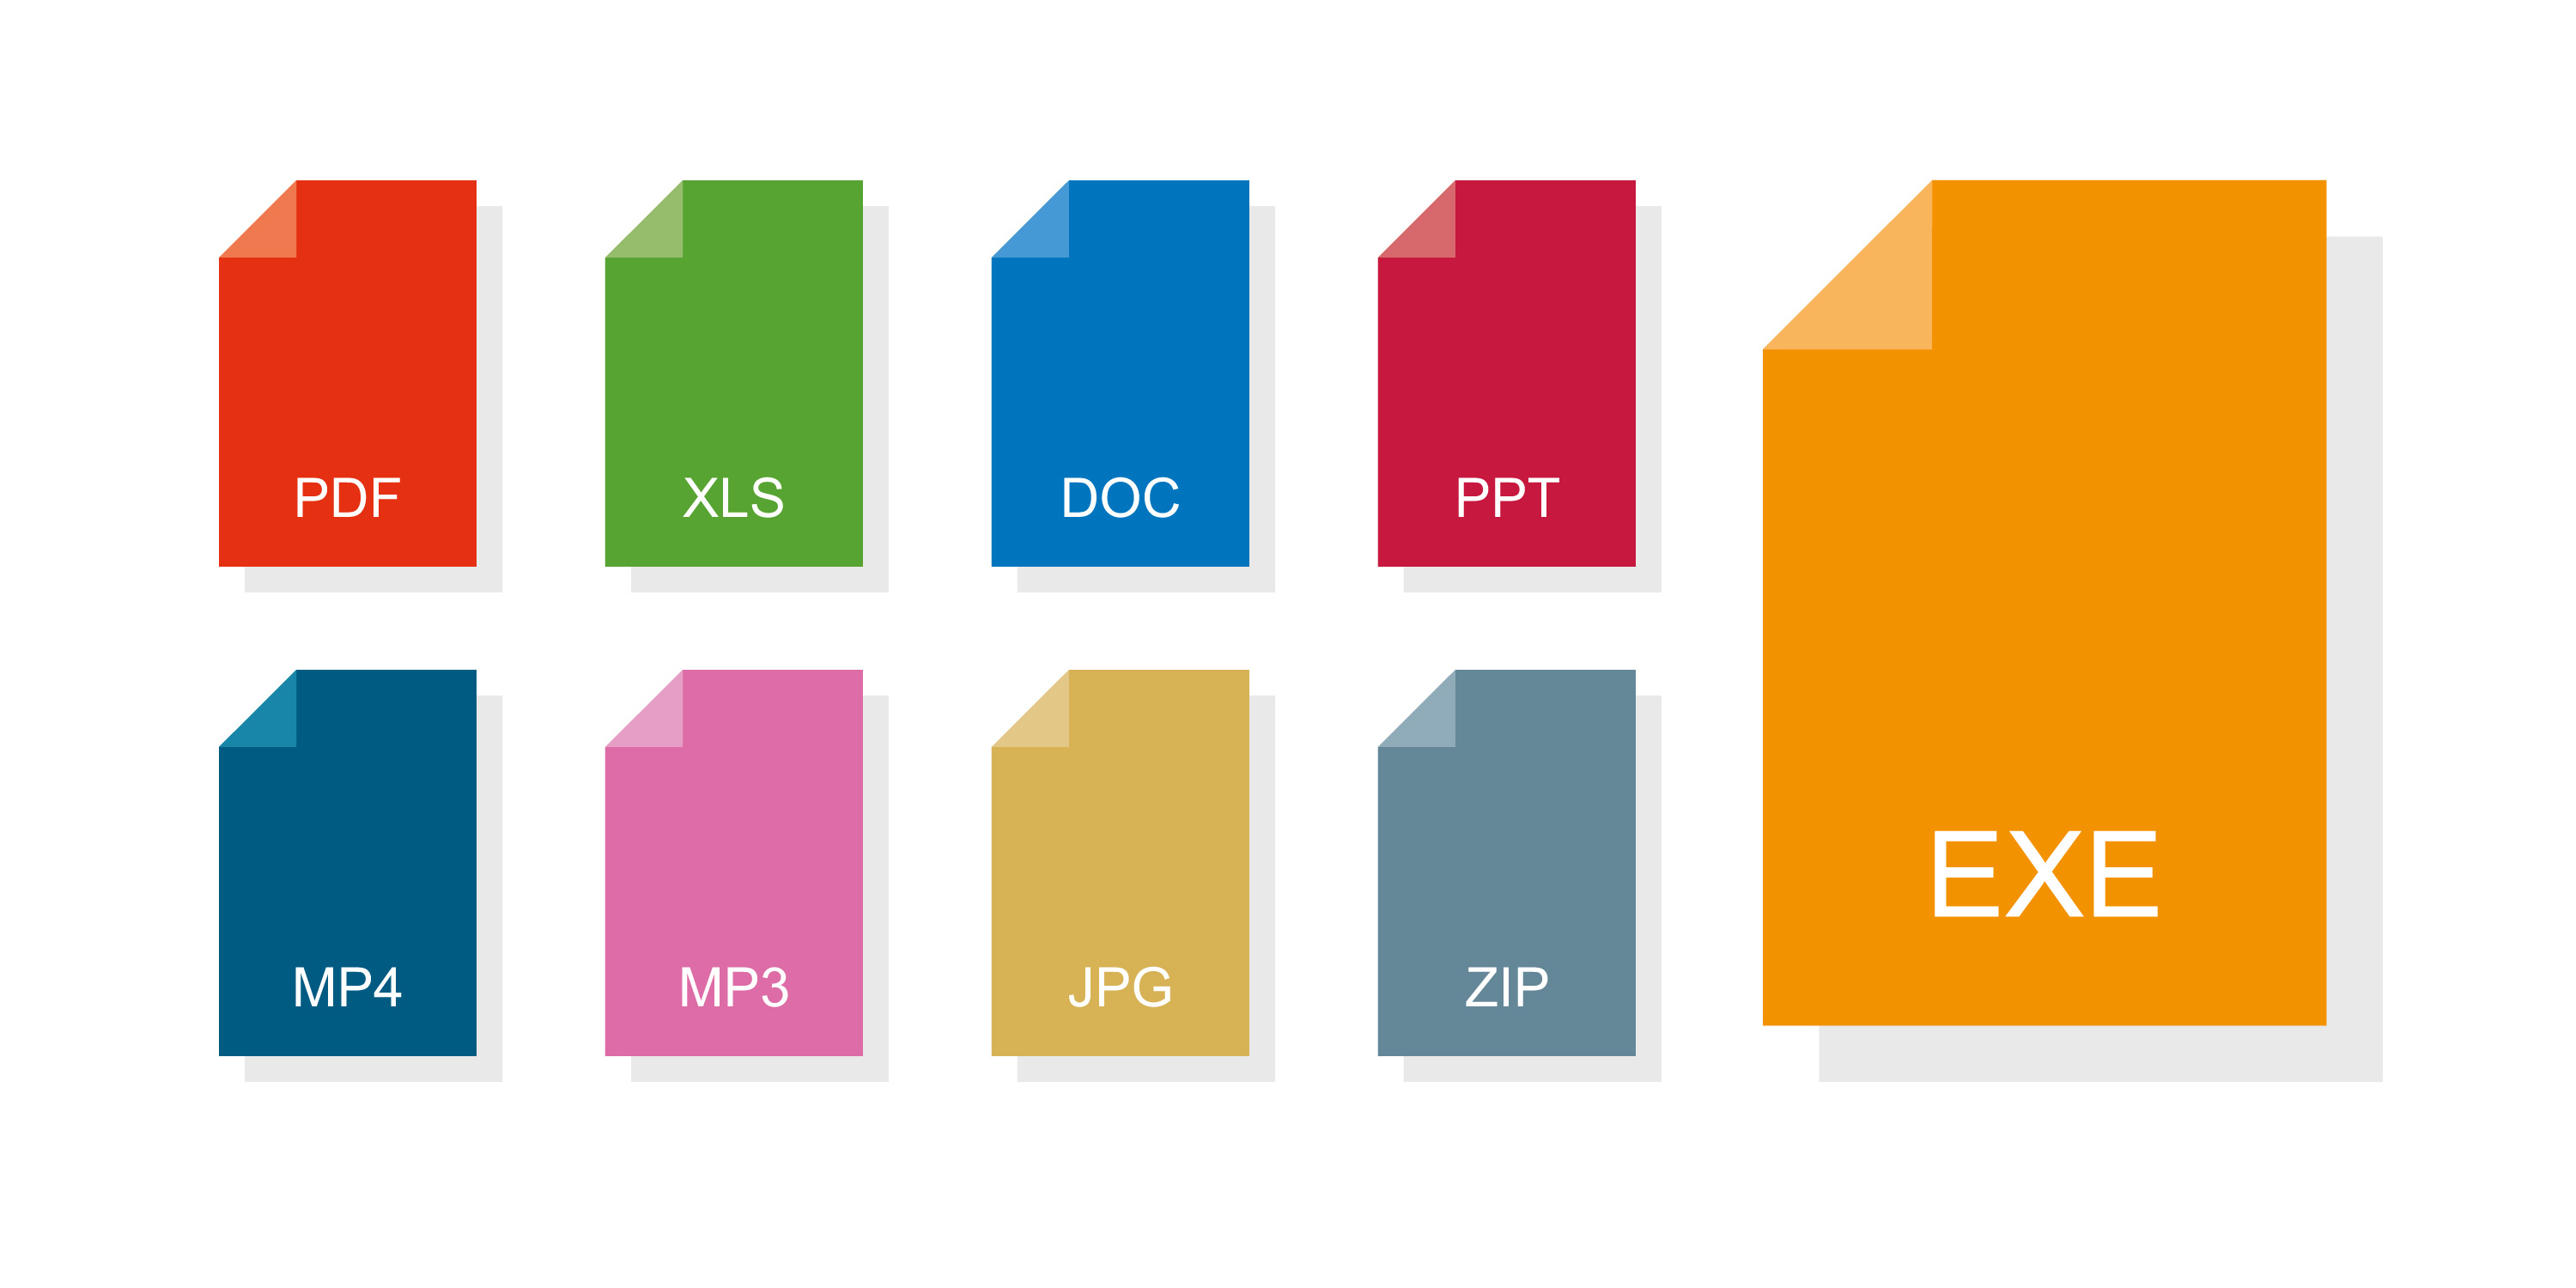 Document icons with popular file formats.